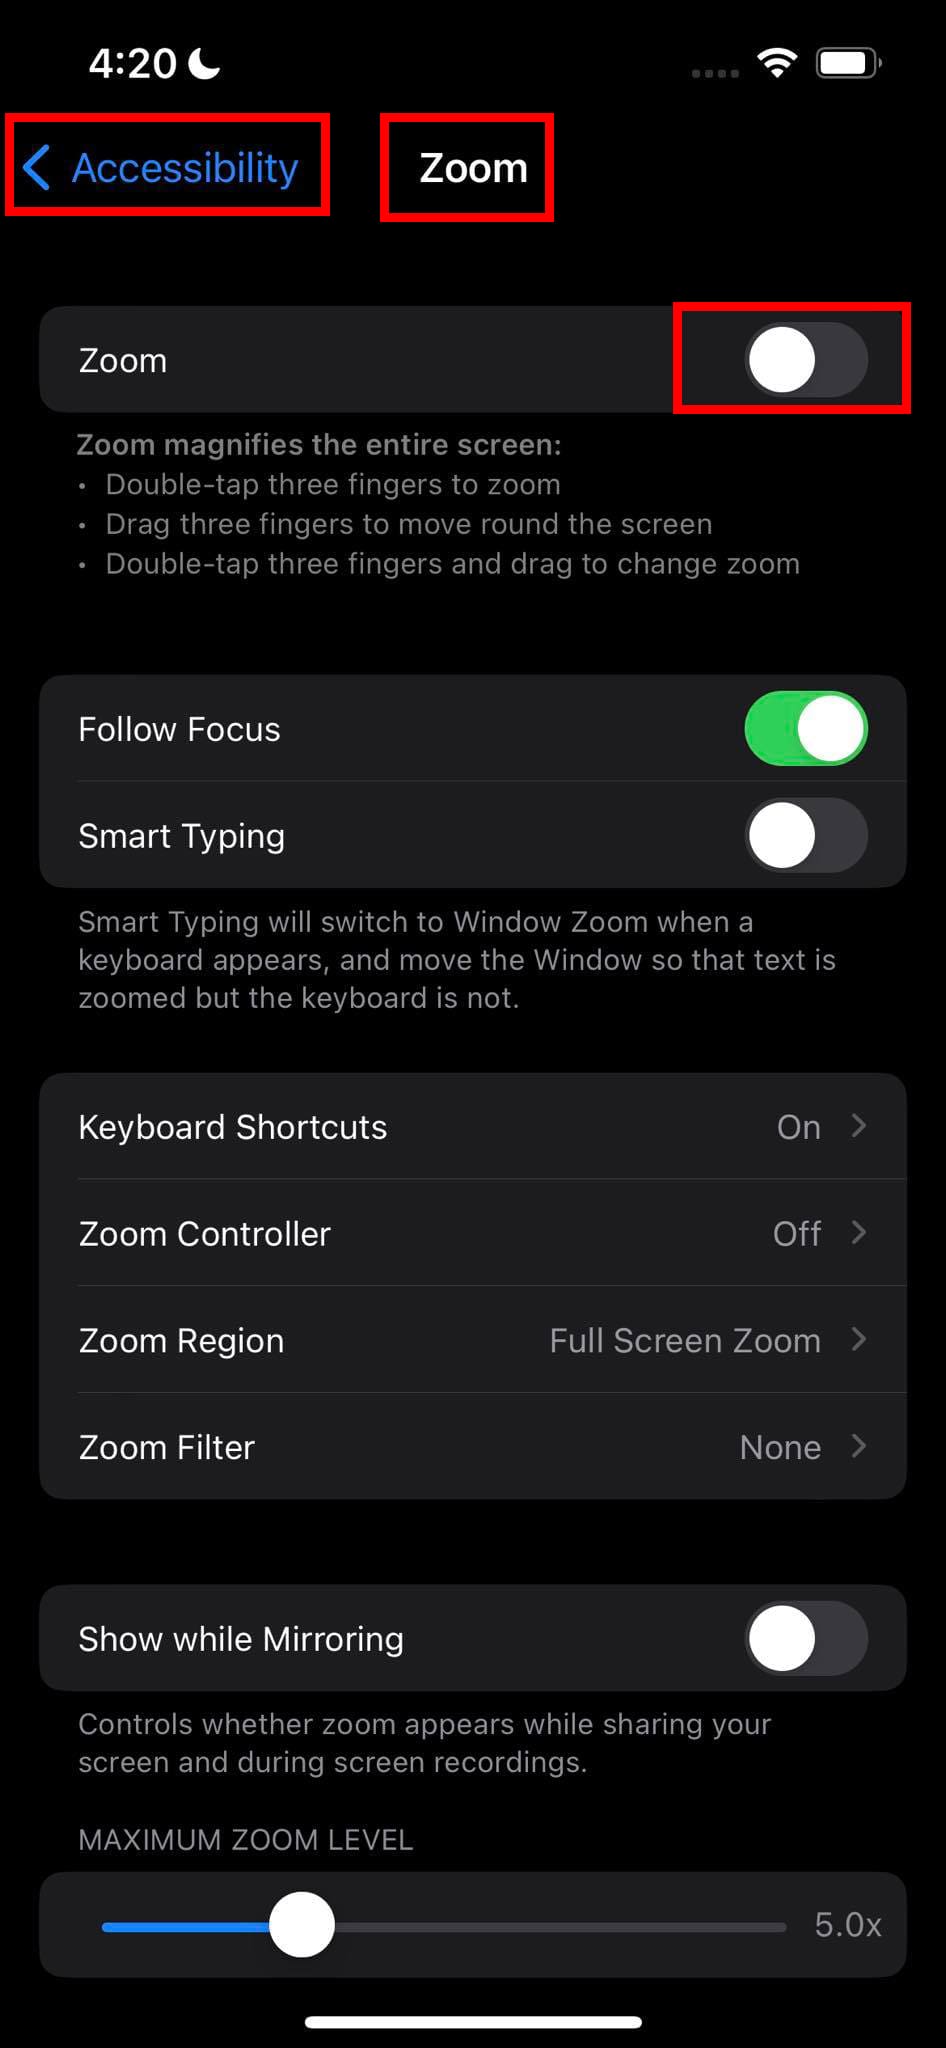 The Zoom features in Accessibility